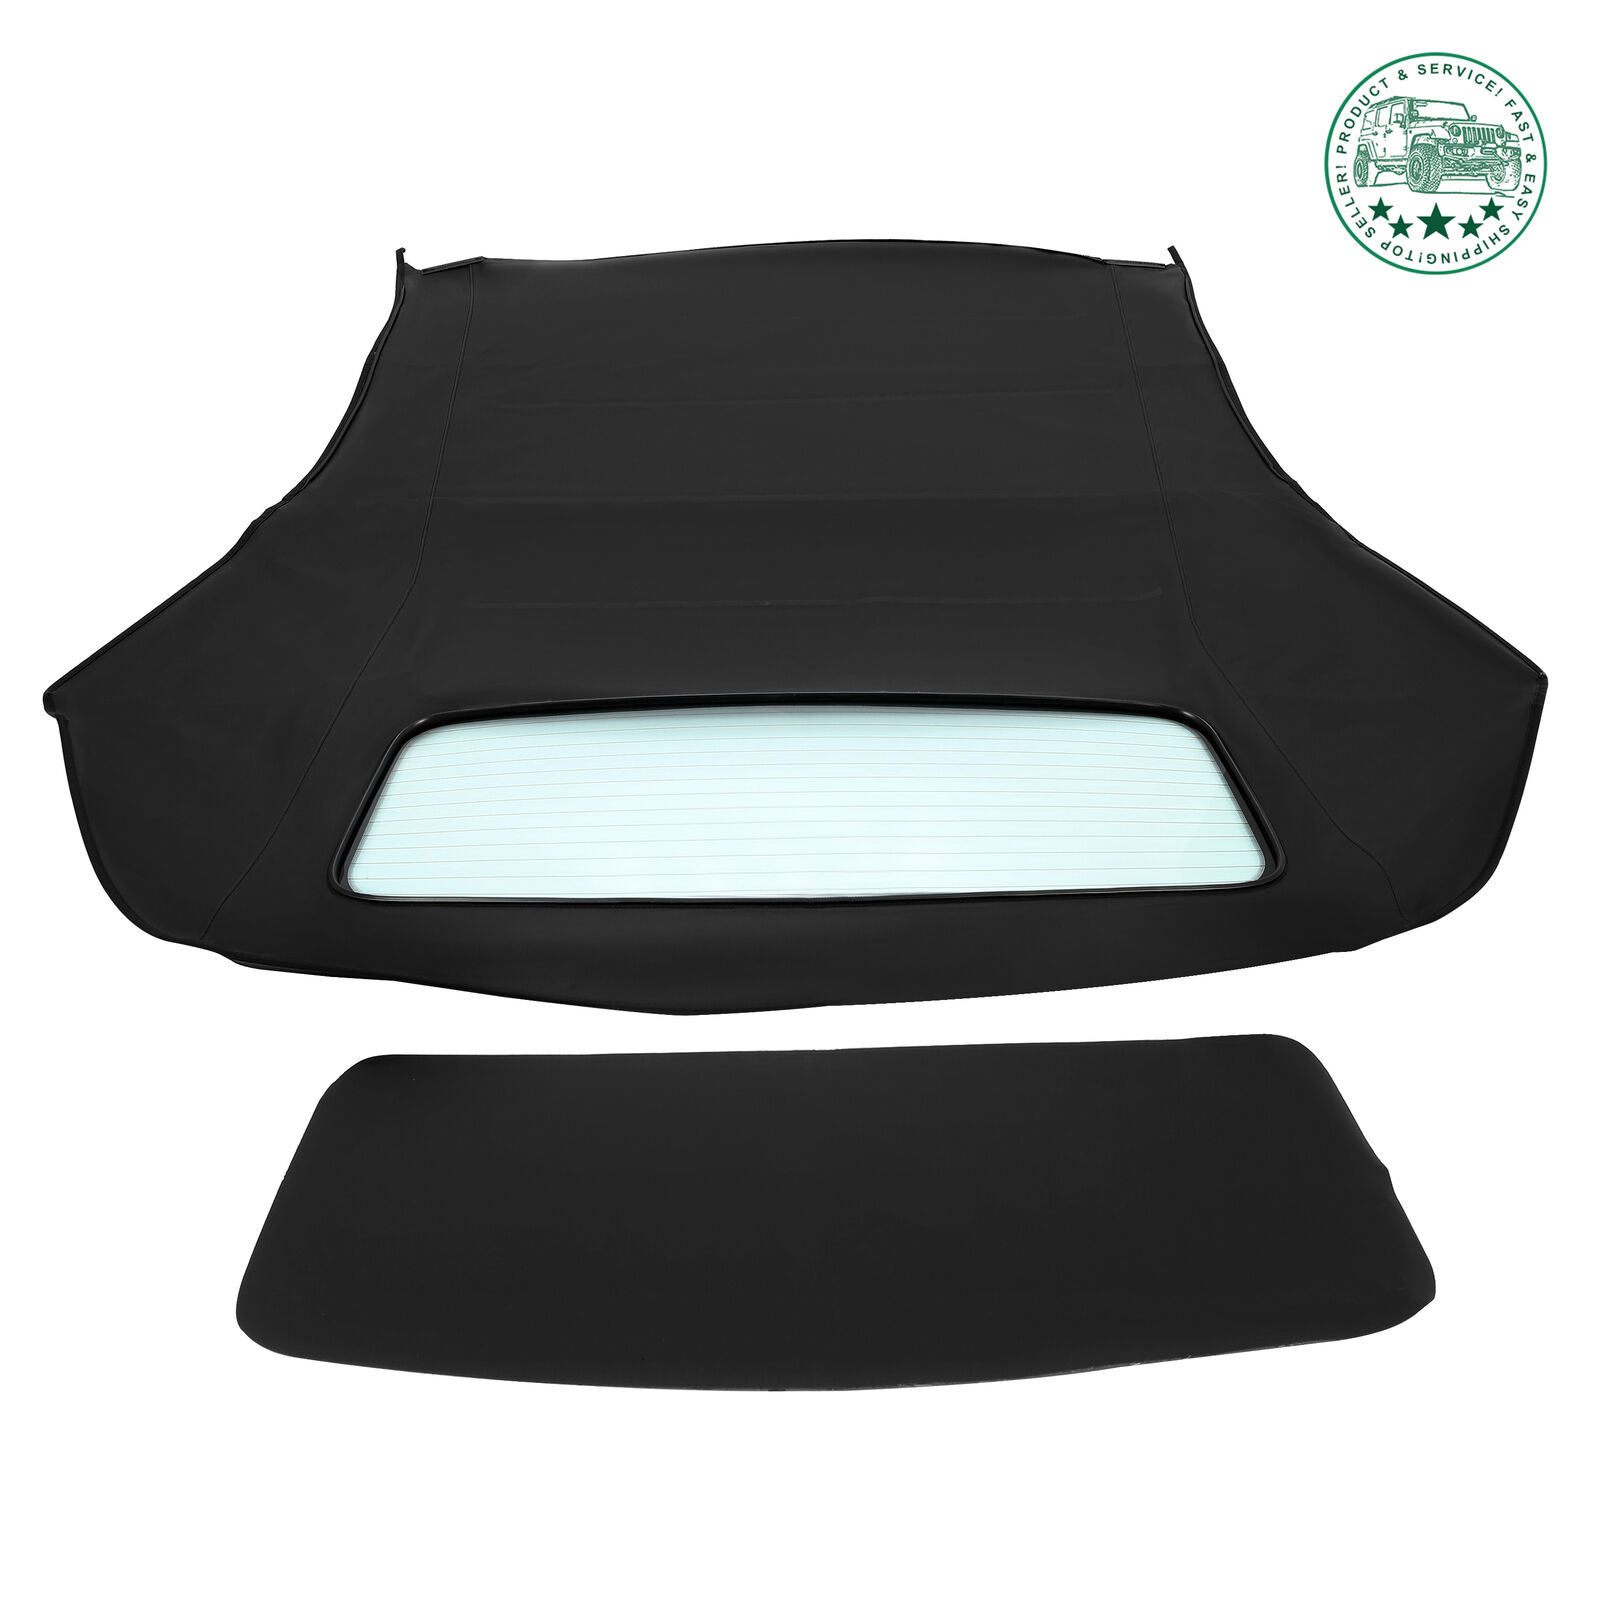 For Audi A4 2003-2009 Convertible Soft Top & Heated Glass Window In Black Vinyl